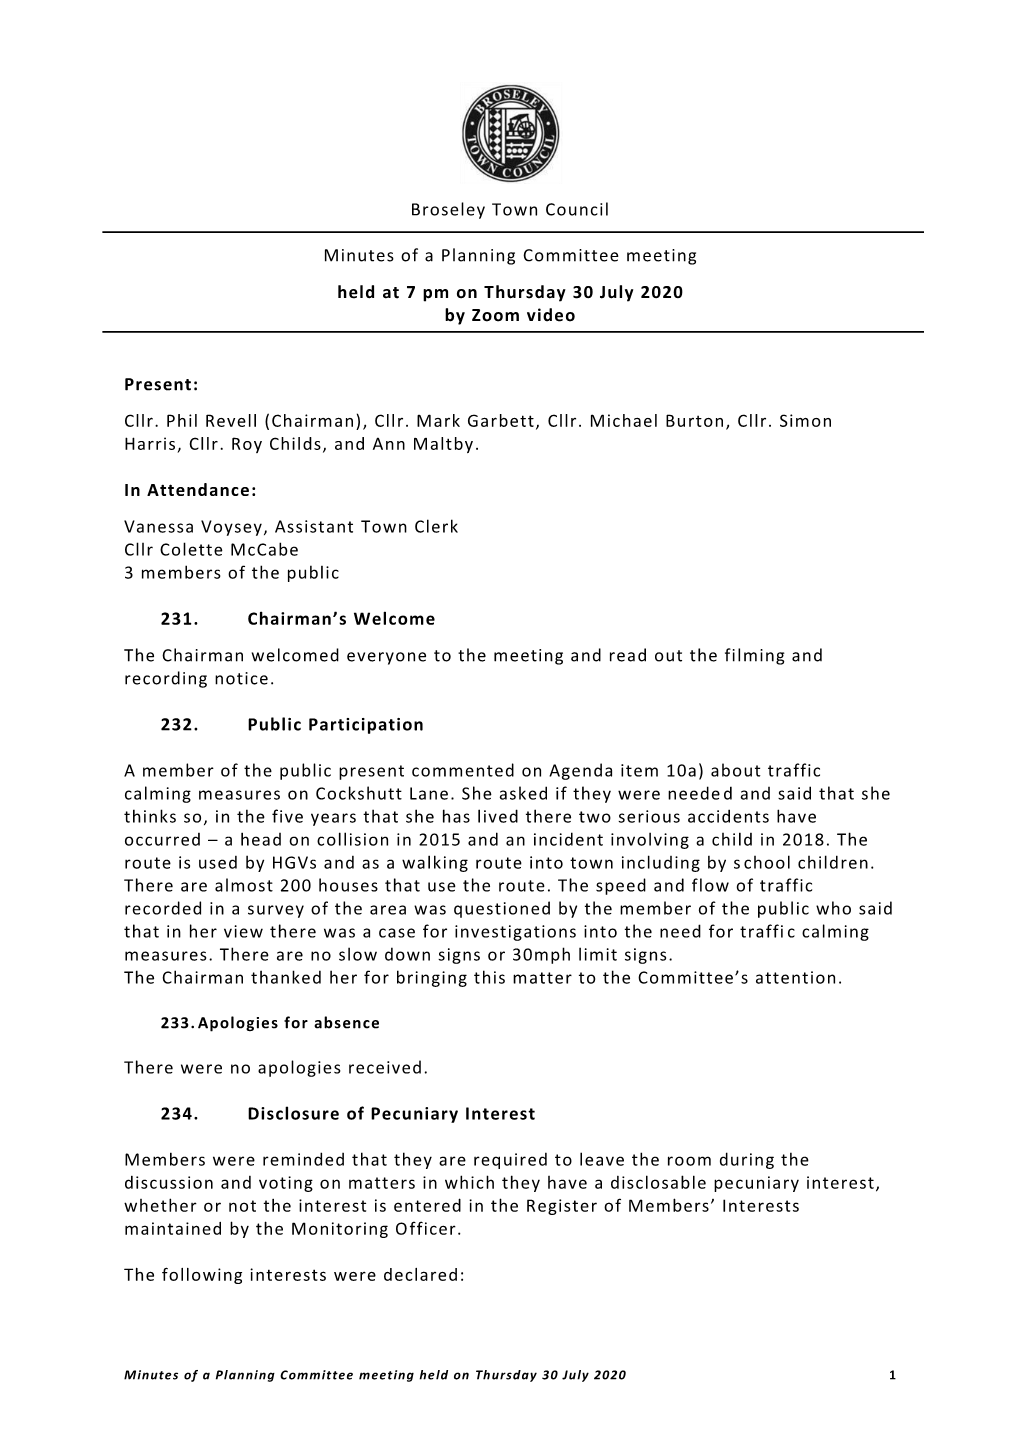 Broseley Town Council Minutes of a Planning Committee Meeting Held